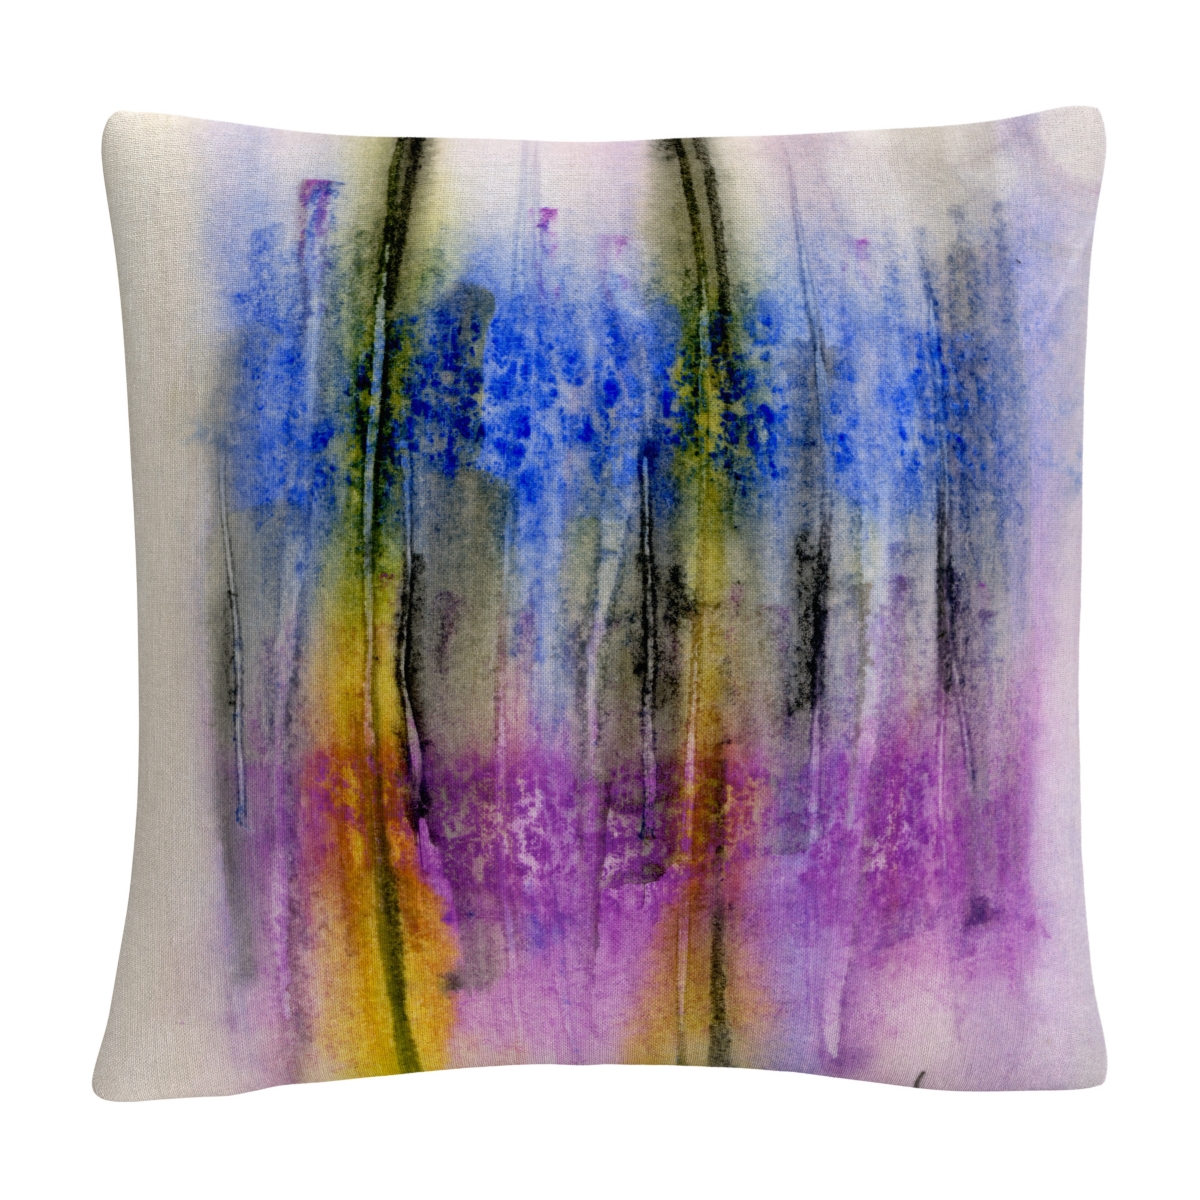 Anthony Sikich Aural Colorful Shapes Line Composition Decorative Pillow, 16 x 16